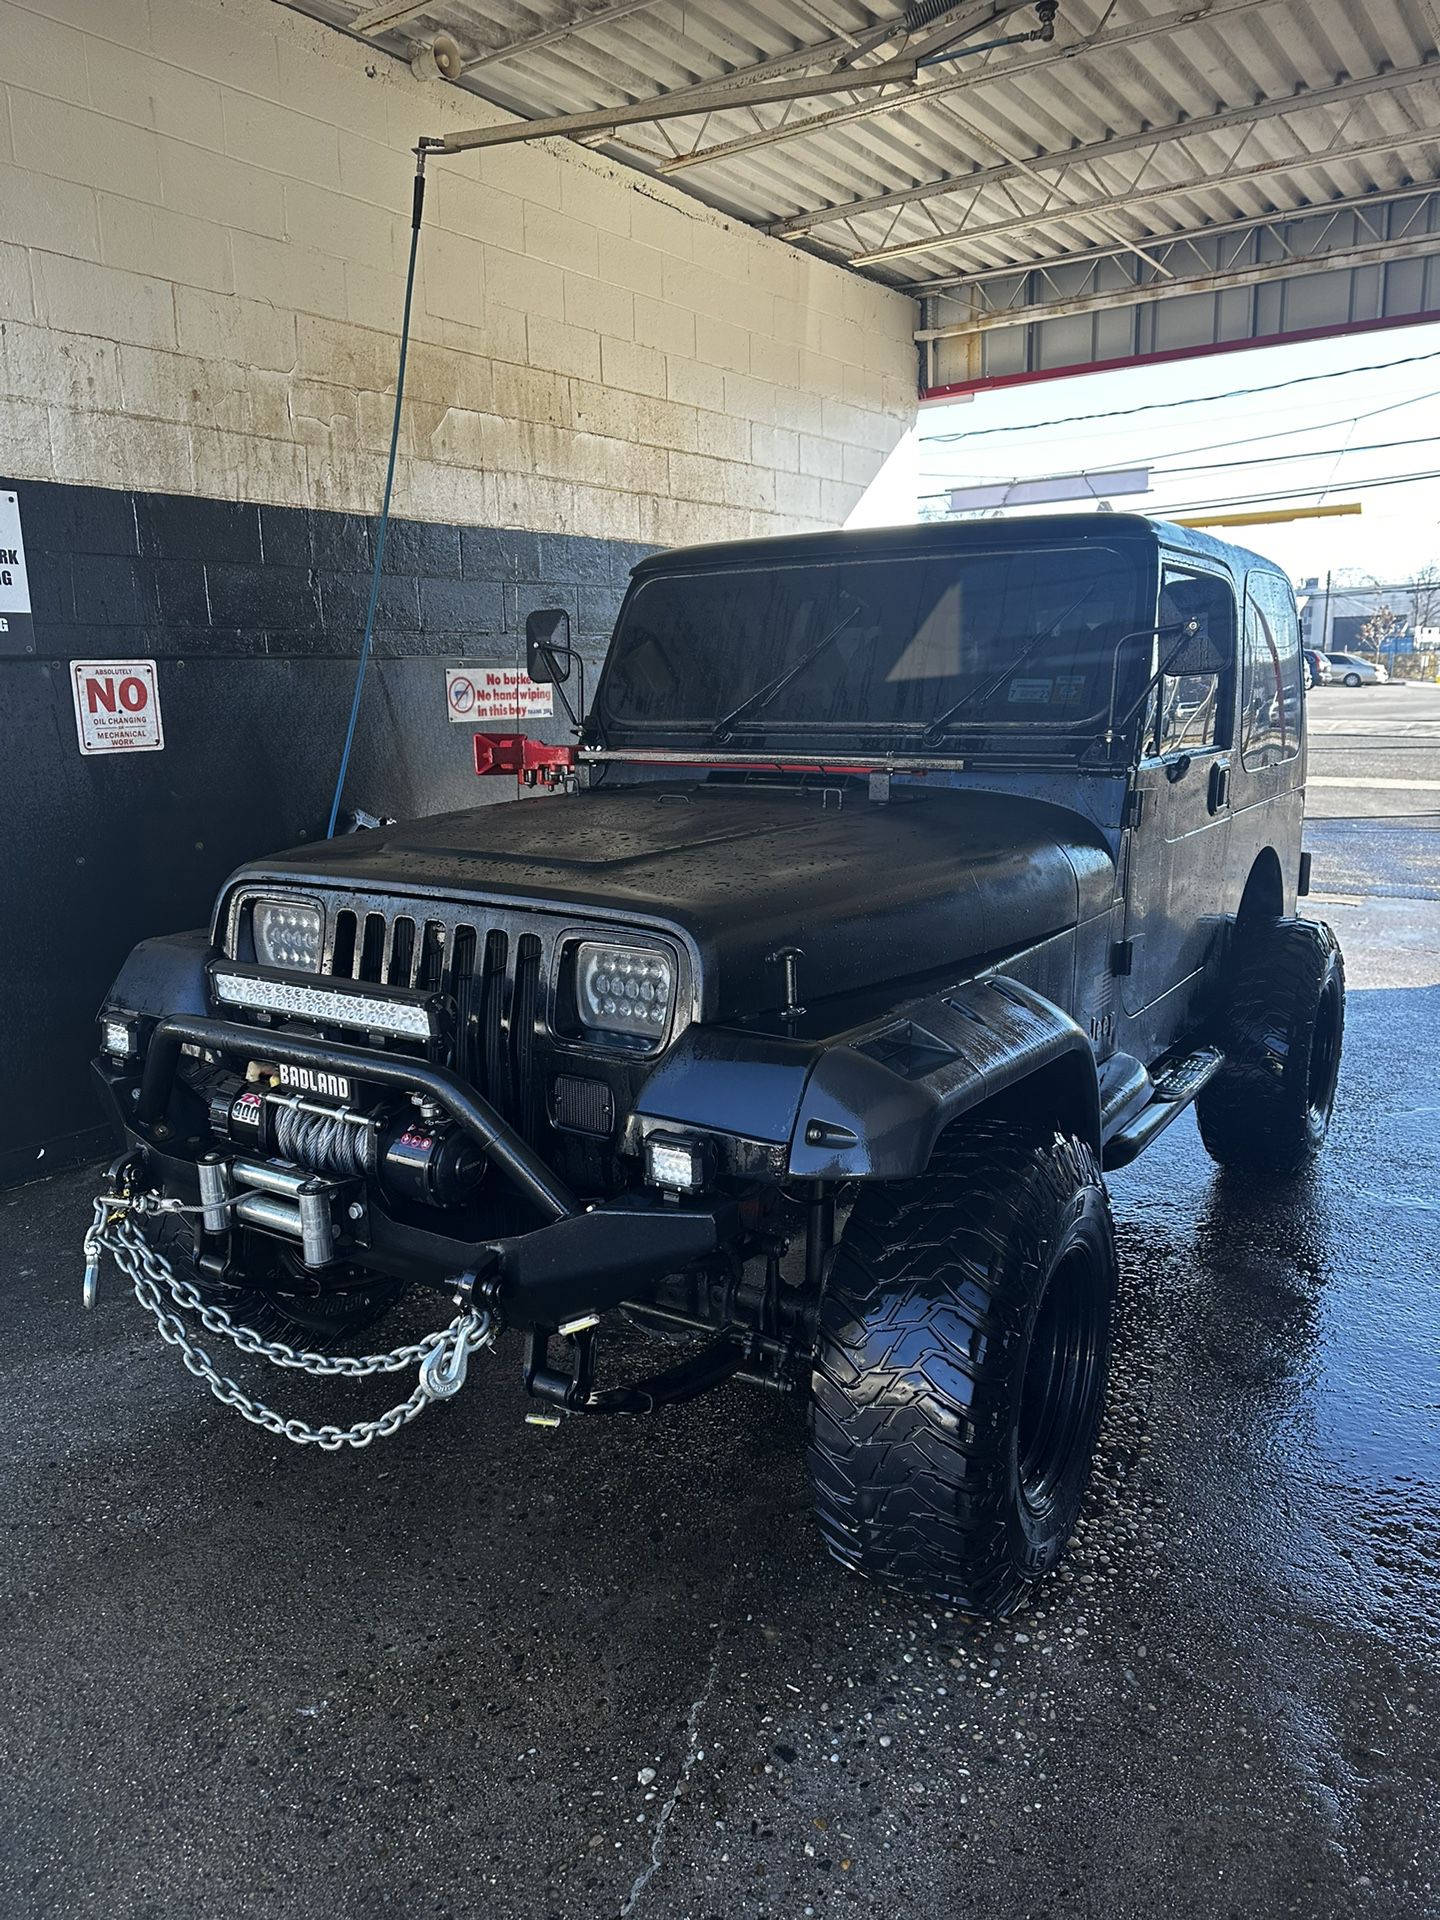 1991 Jeep Wrangler for Sale in Commack, NY - OfferUp